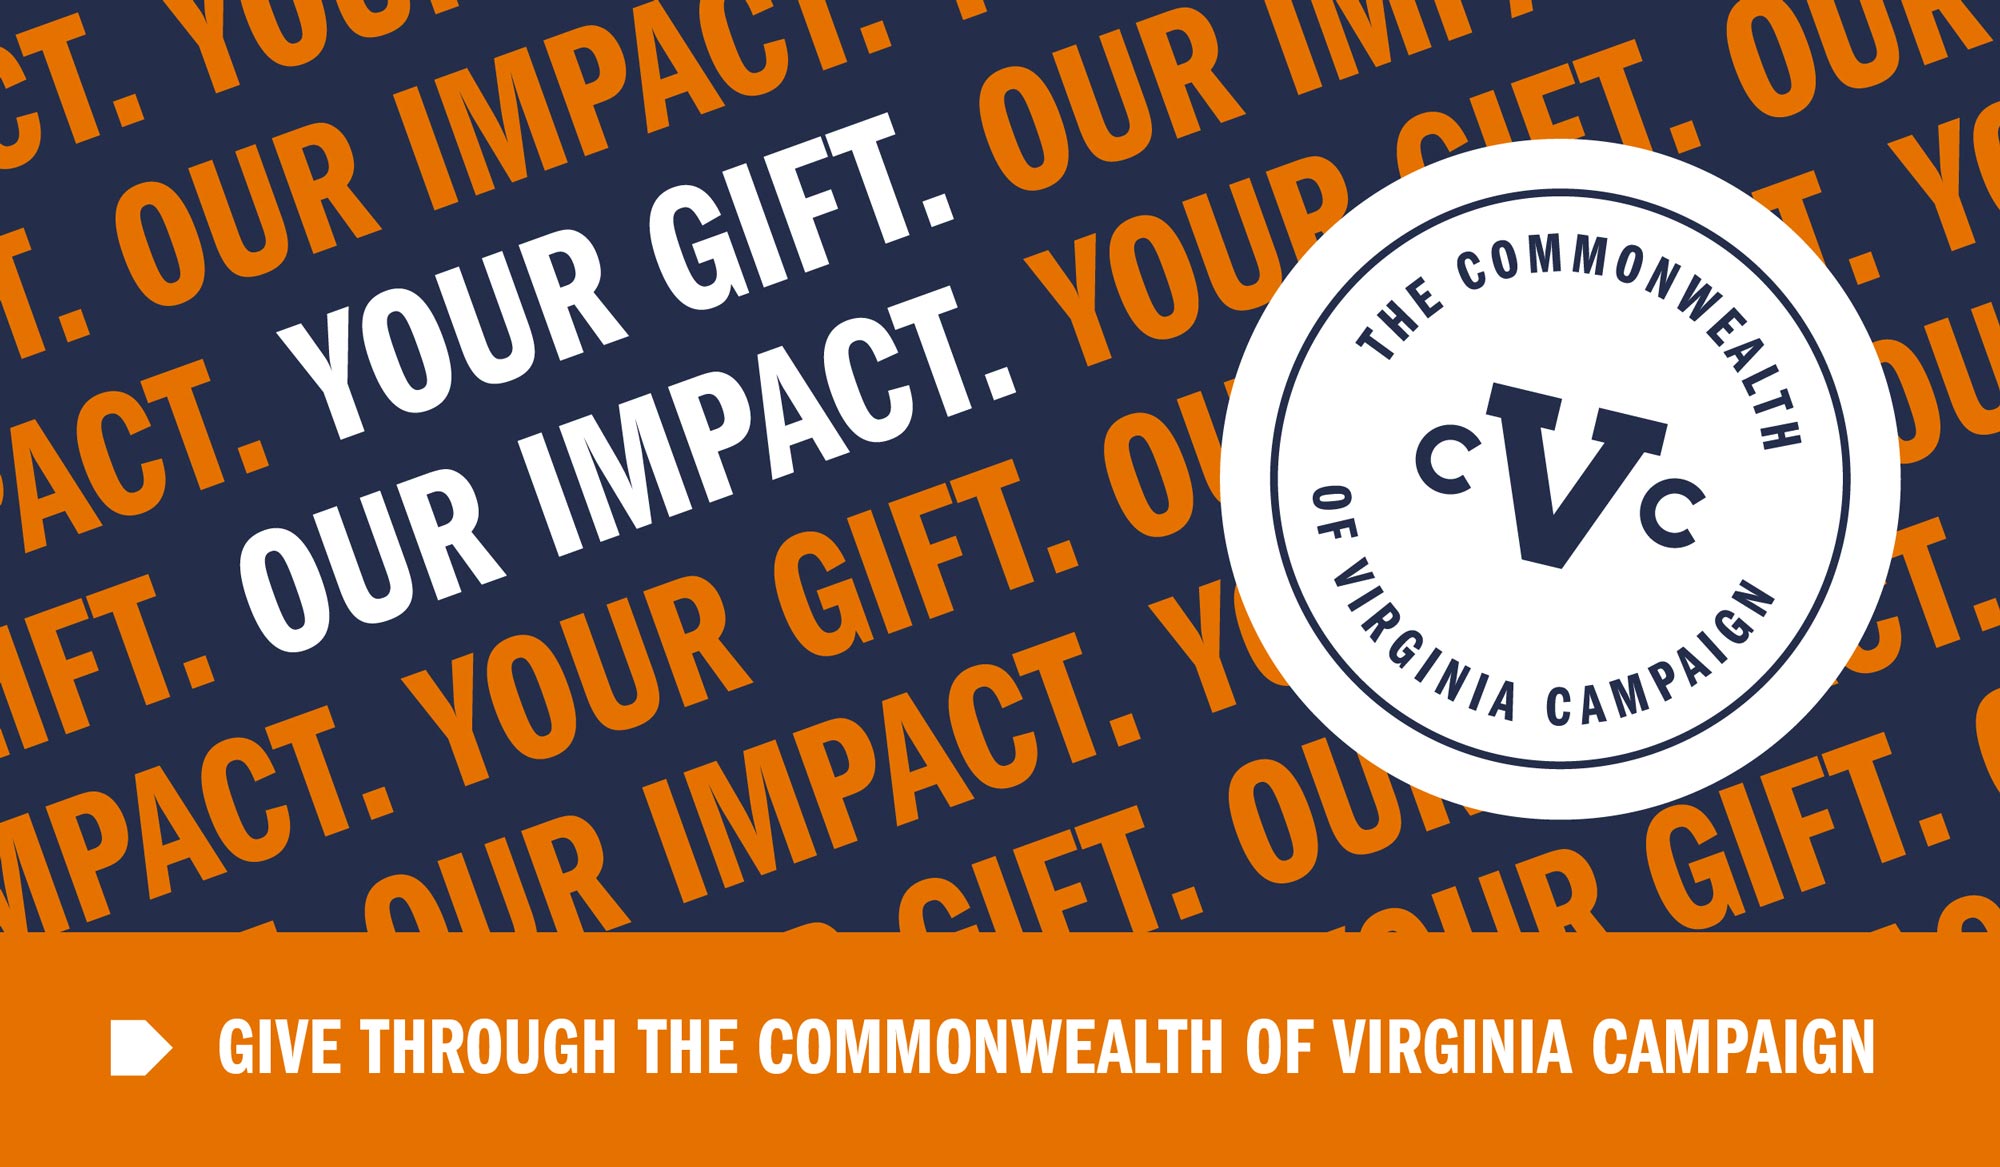 Your gift. Our impact. Give through the Commonwealth of Virginia Campaign.